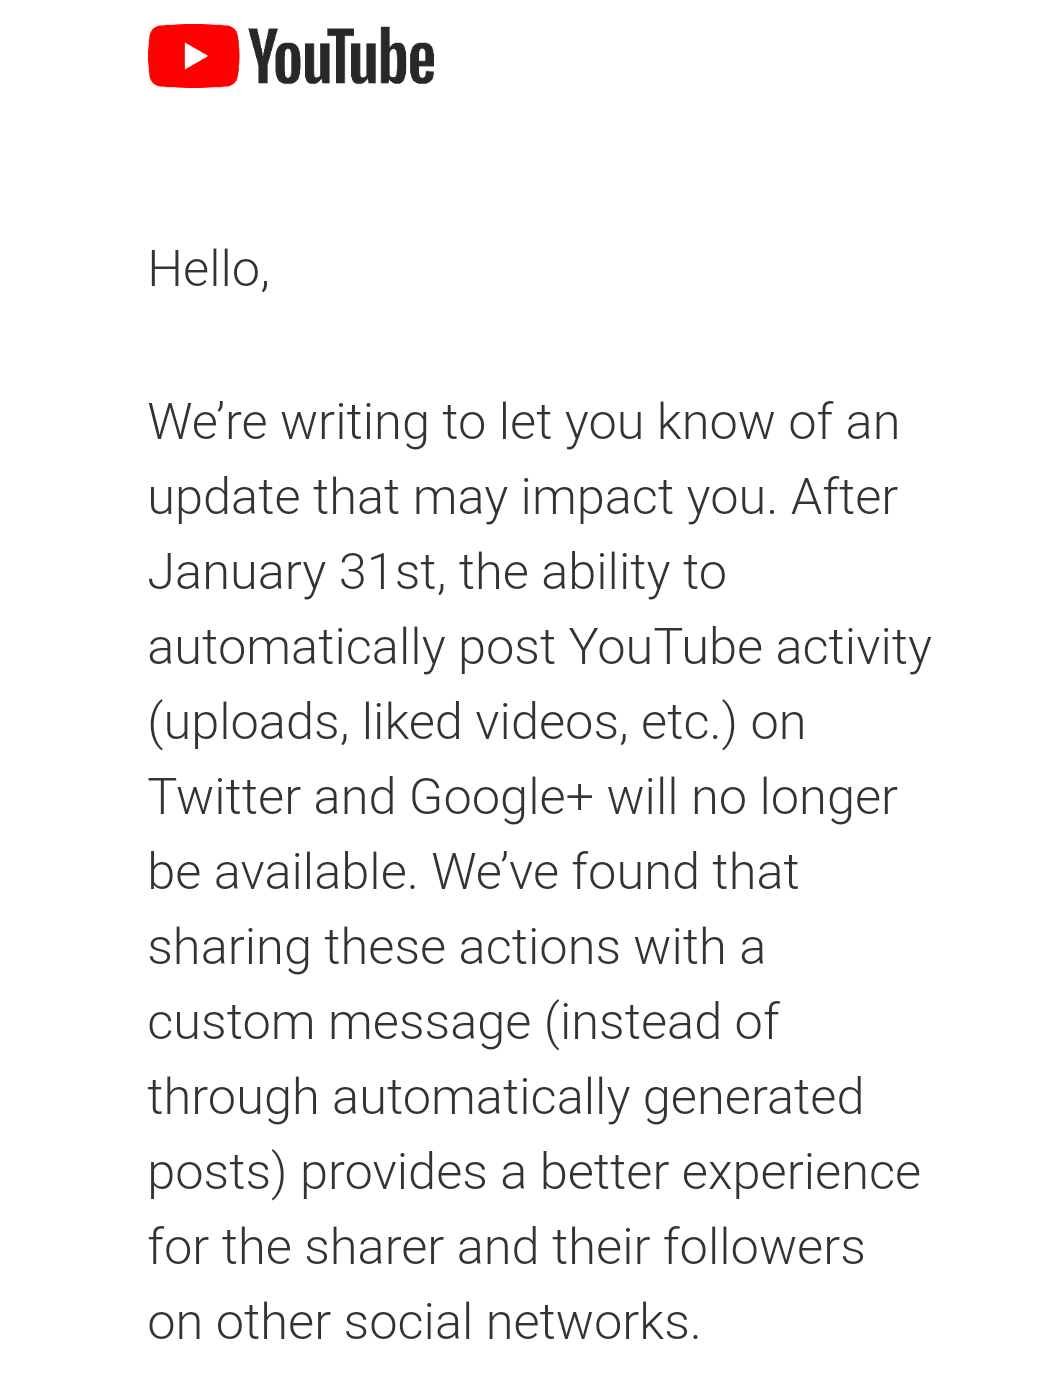 removing option to automatically share to Twitter and Google+